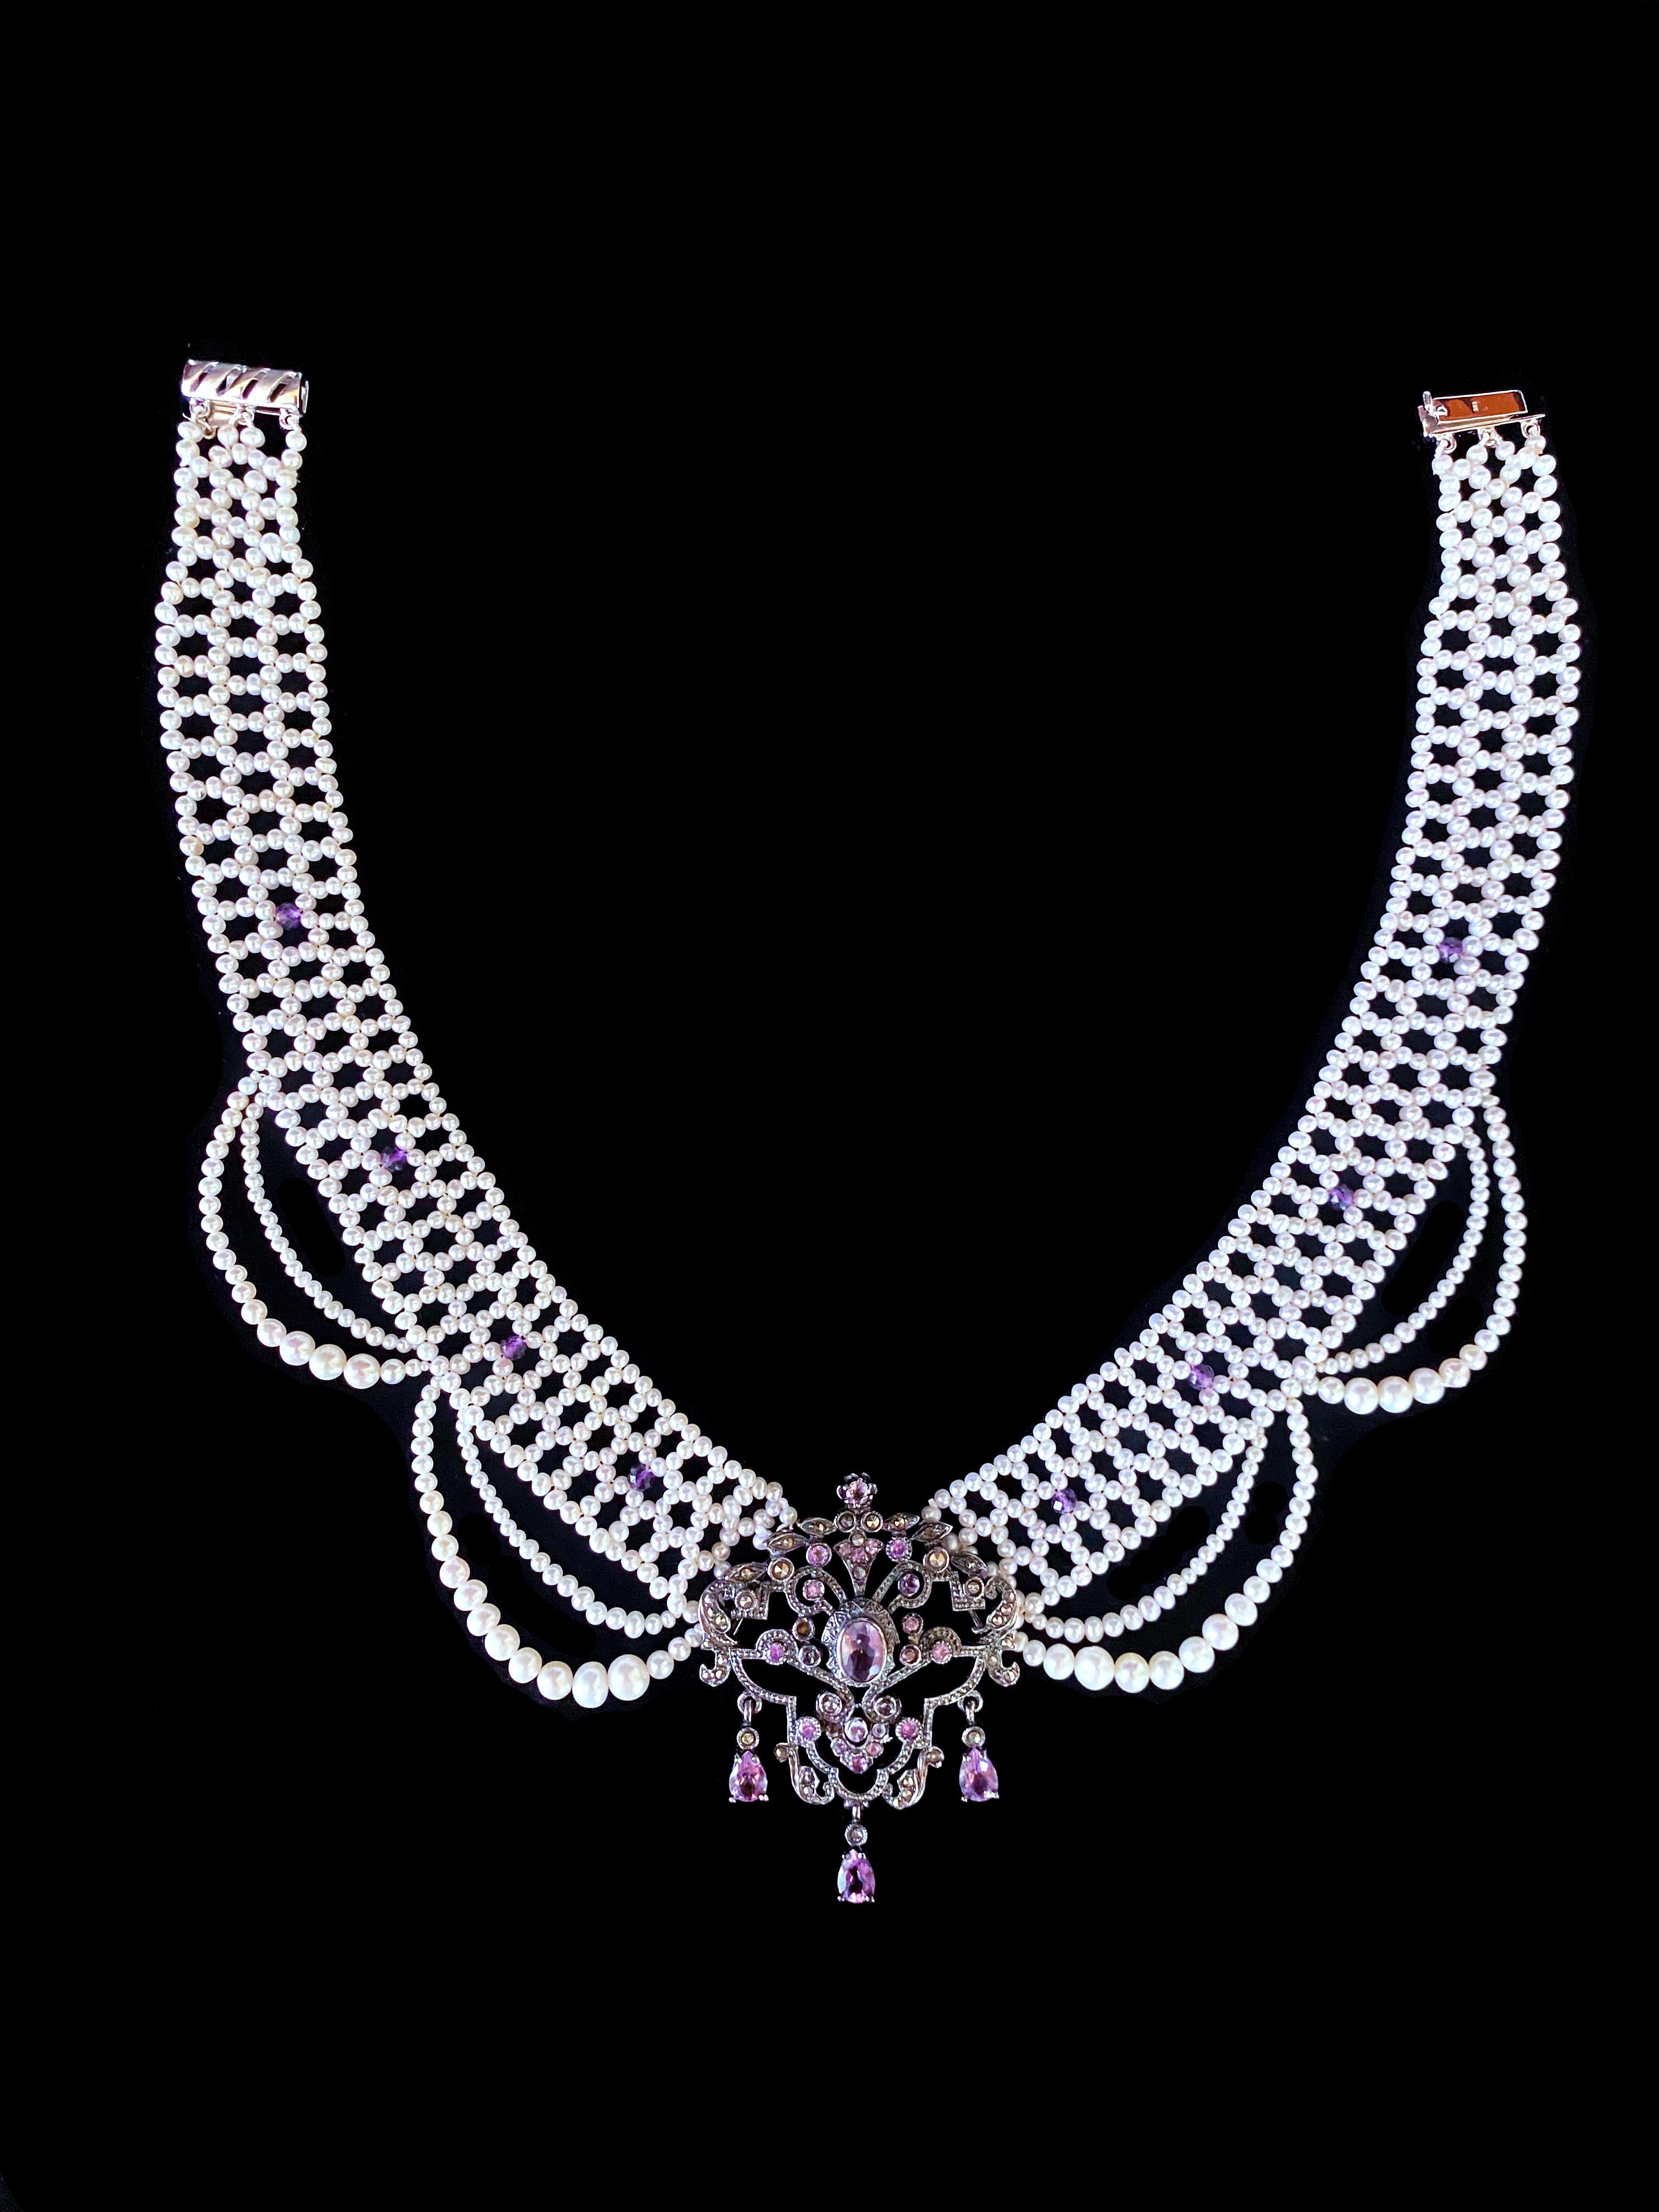 Marina J. Unique Pearl Draped Necklace with Vintage Amethyst Silver Centerpiece For Sale 2